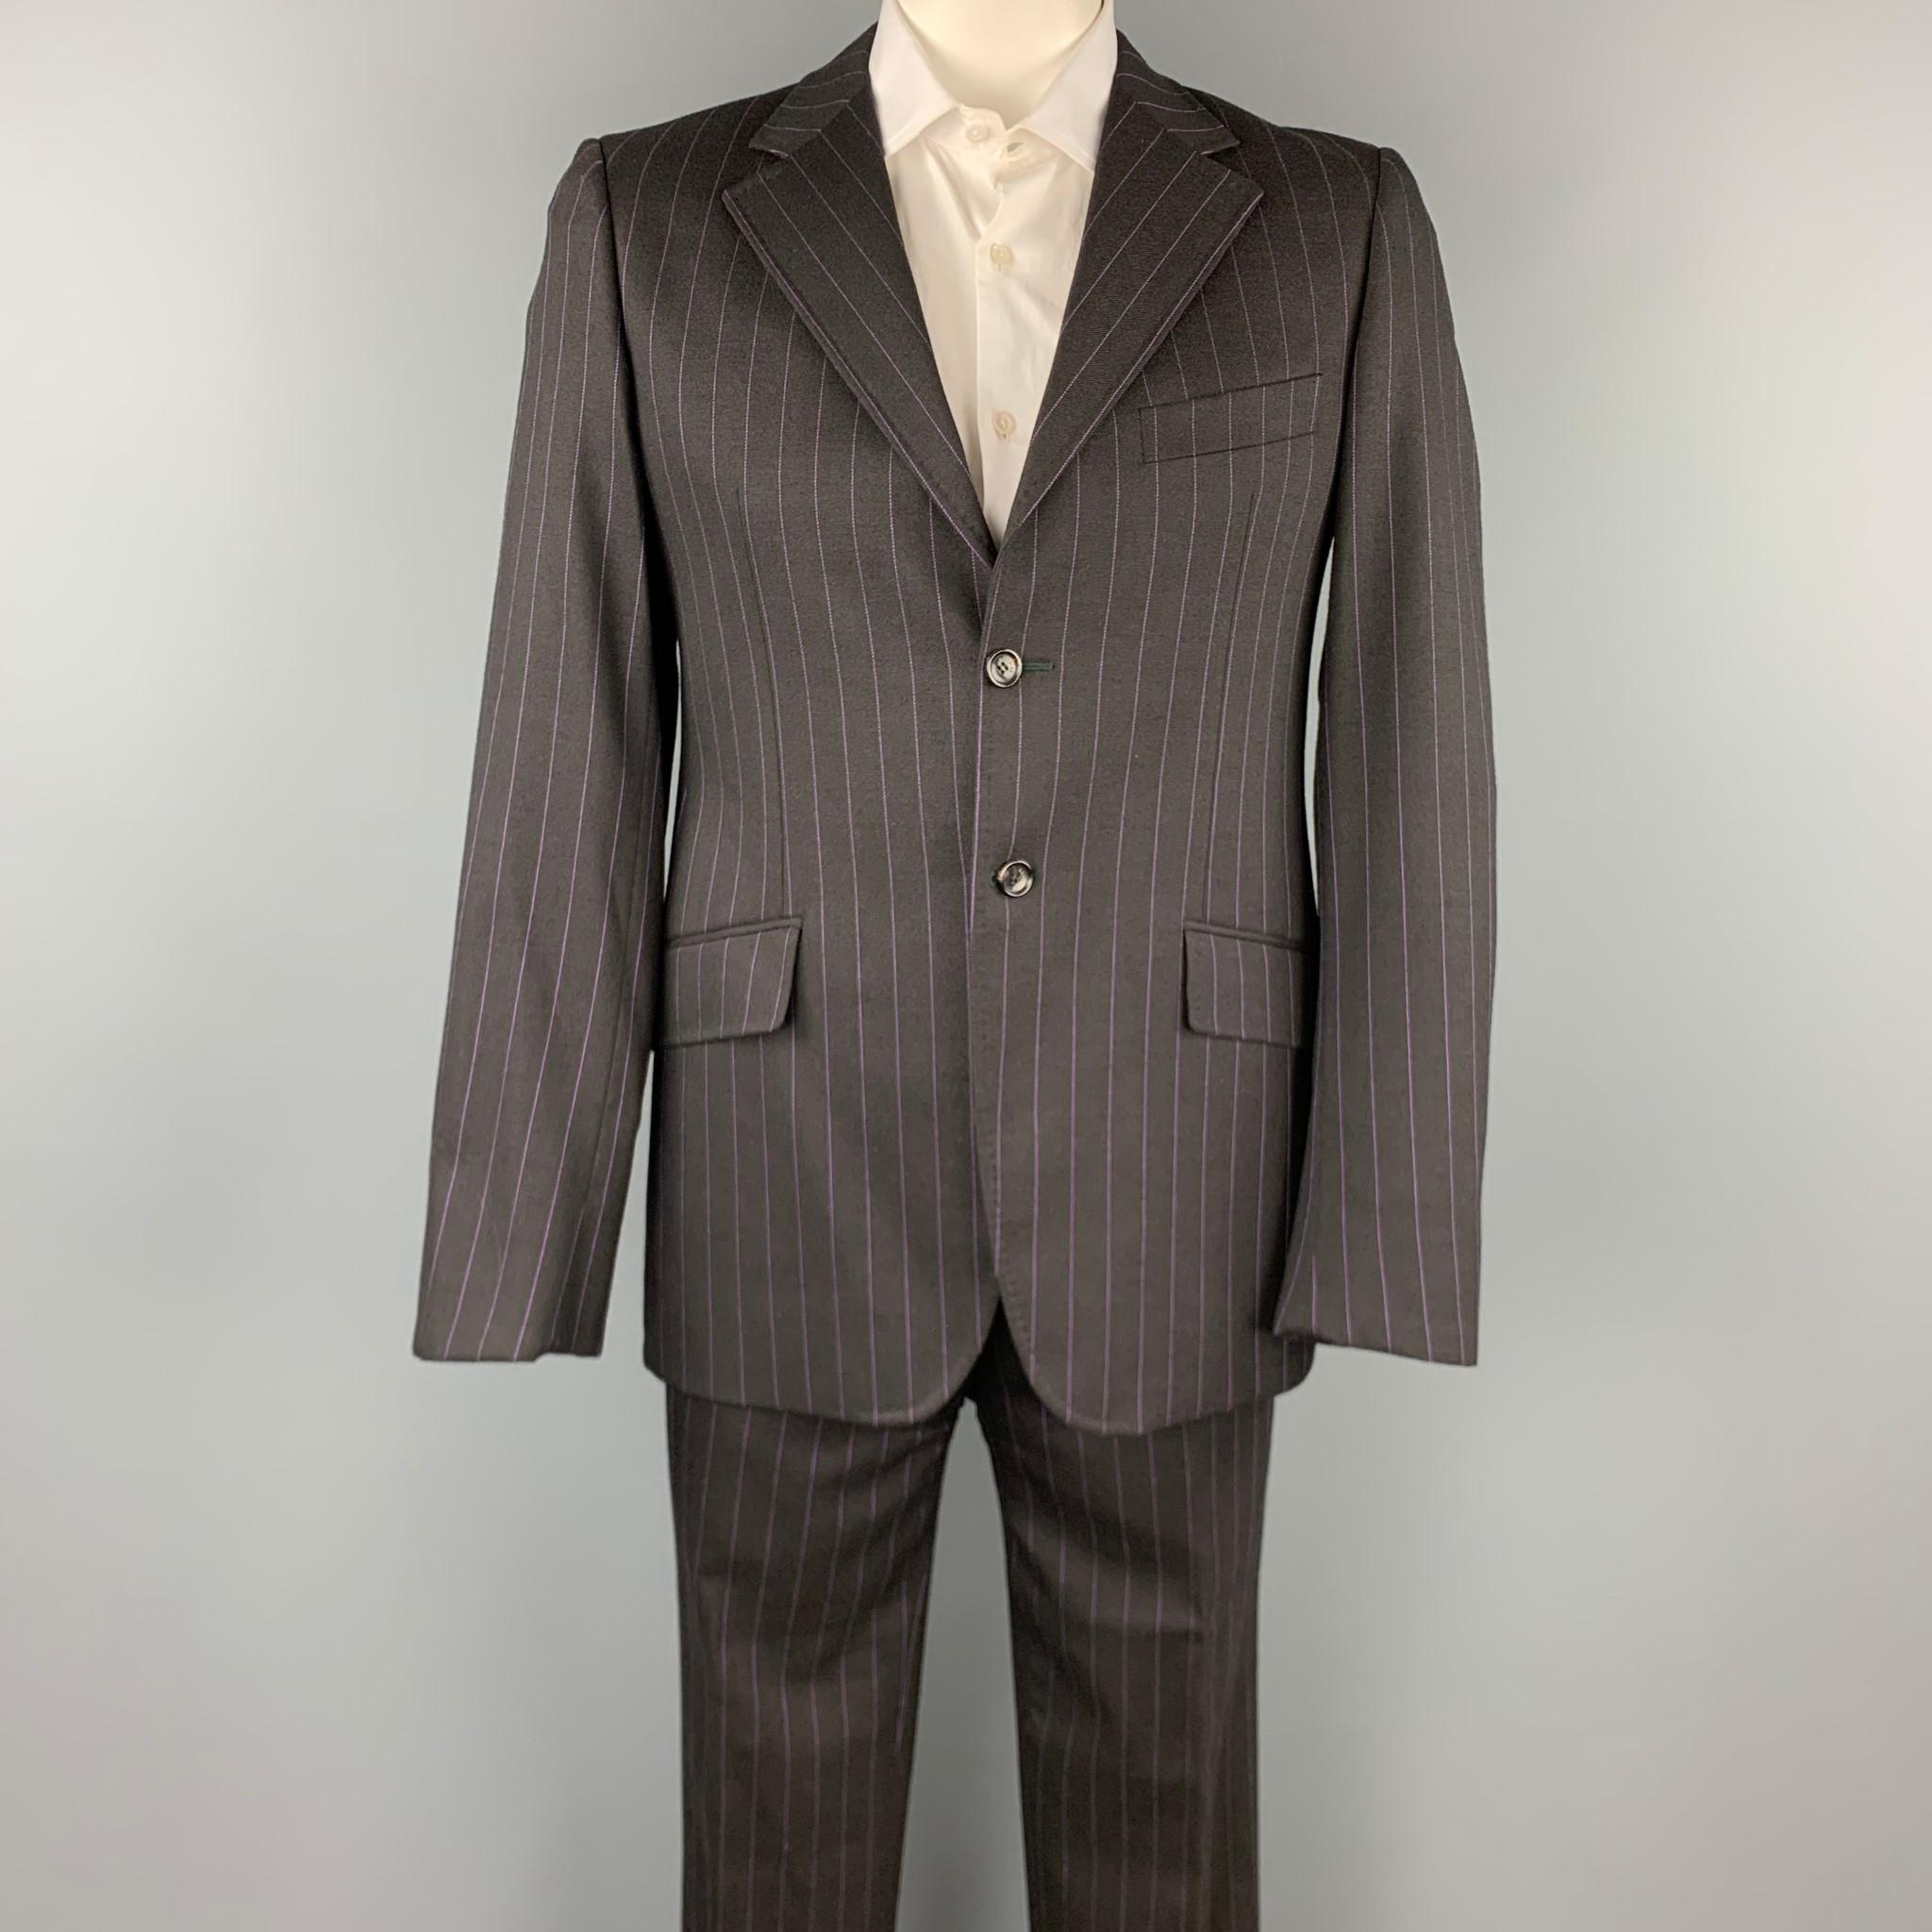 MOSCHINO suit comes in a black stripe wool and includes a single breasted, two button sport coat with a notch lapel and matching flat front trousers. Made in Italy. 

Very Good Pre-Owned Condition.
Marked: IT 52

Measurements:

-Jacket
Shoulder: